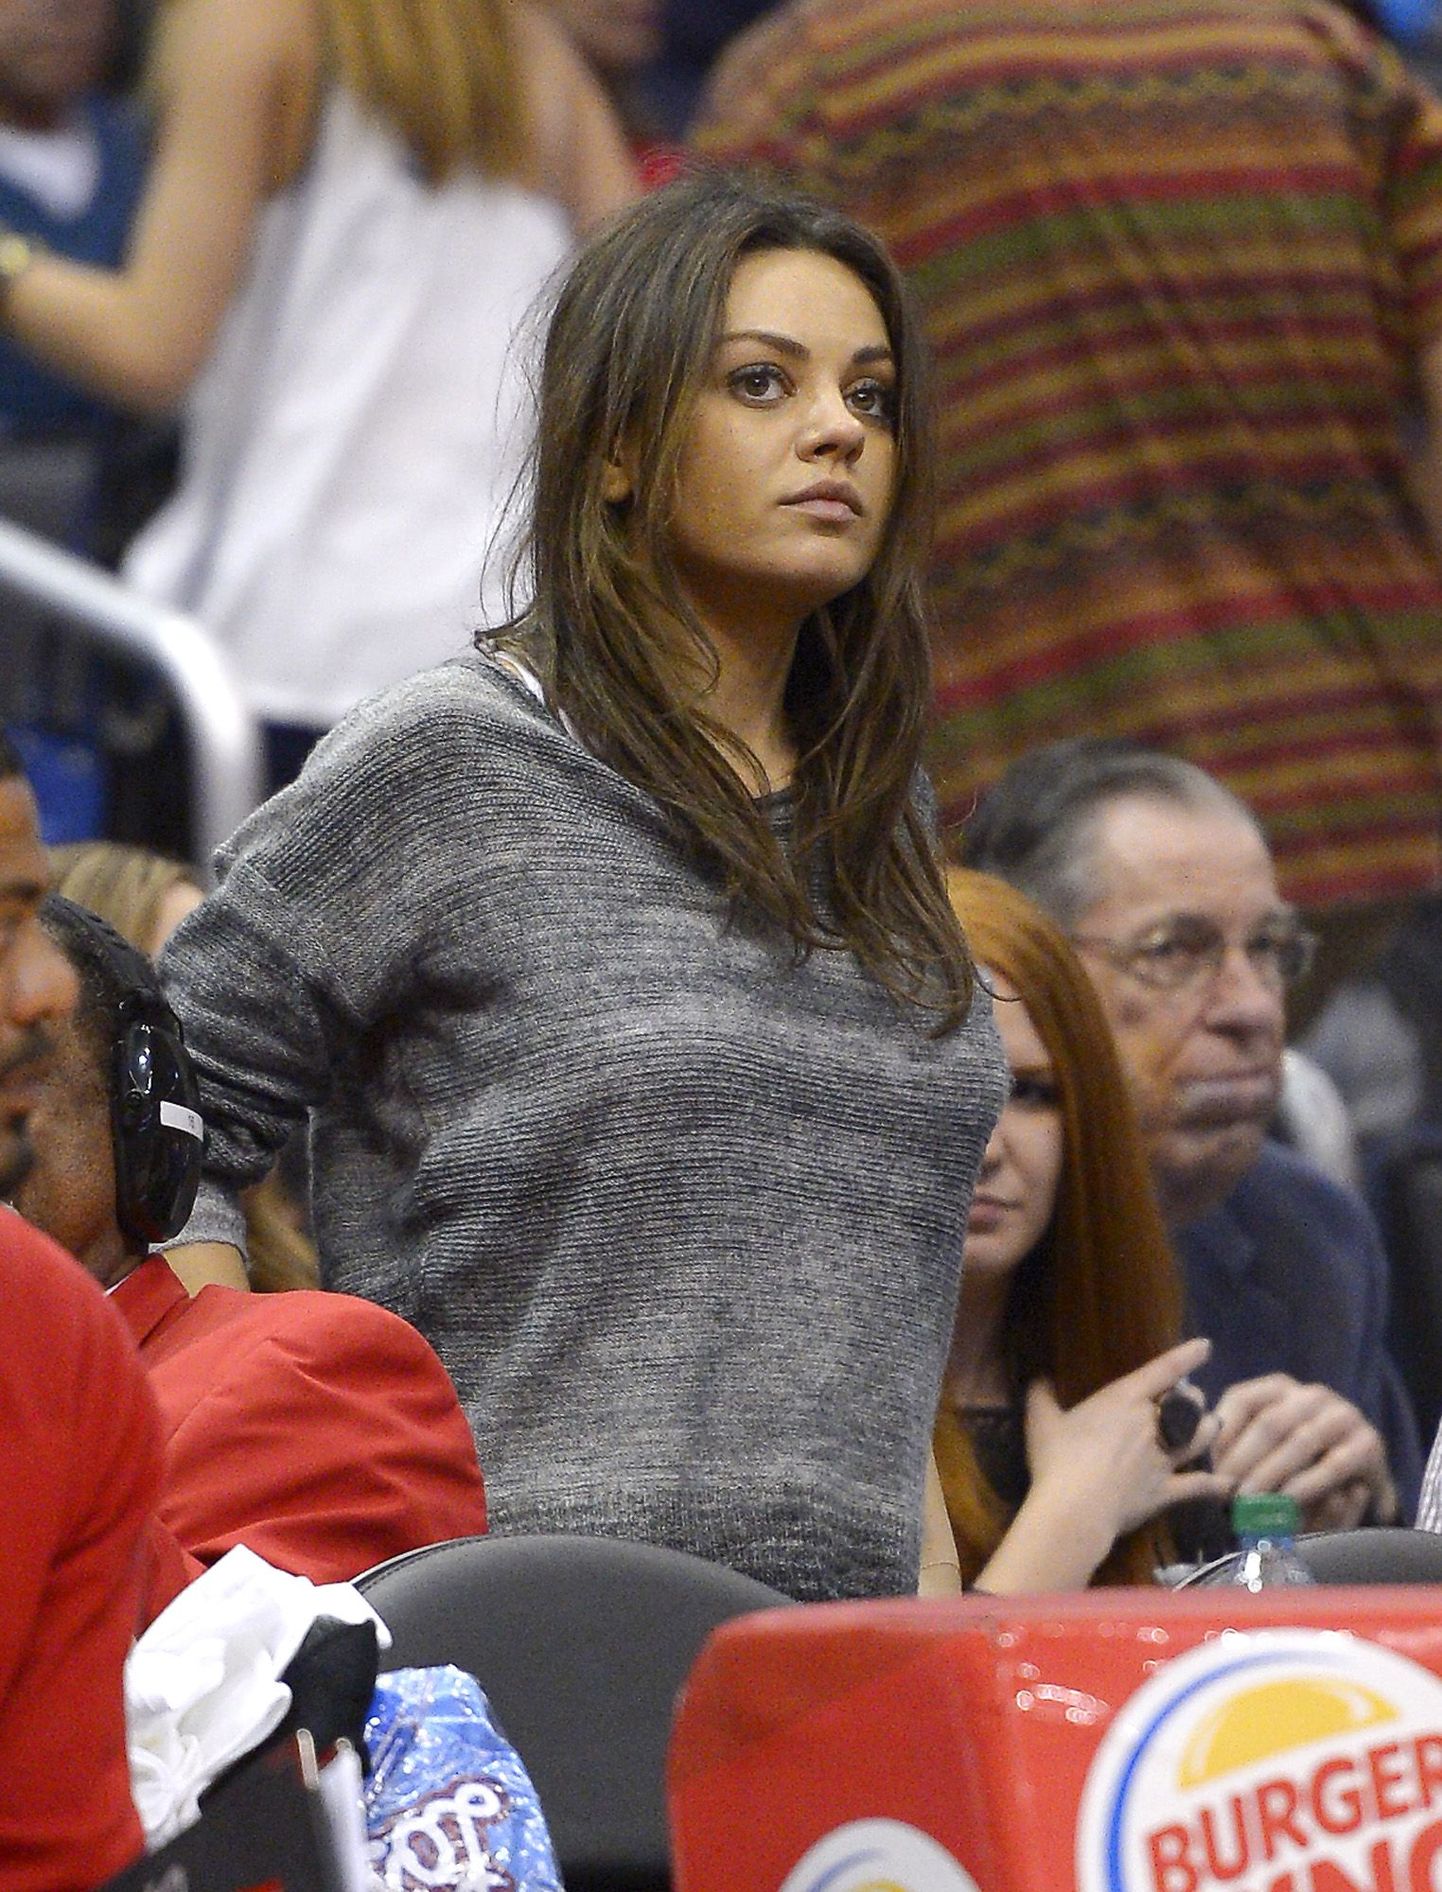 Actress Mila Kunis gets up to leave after watching the Los Angeles Clippers play the Detroit Pistons during the second half of an NBA basketball game, Saturday, March 22, 2014, in Los Angeles. (AP Photo/Mark J. Terrill) / TT / kod 436